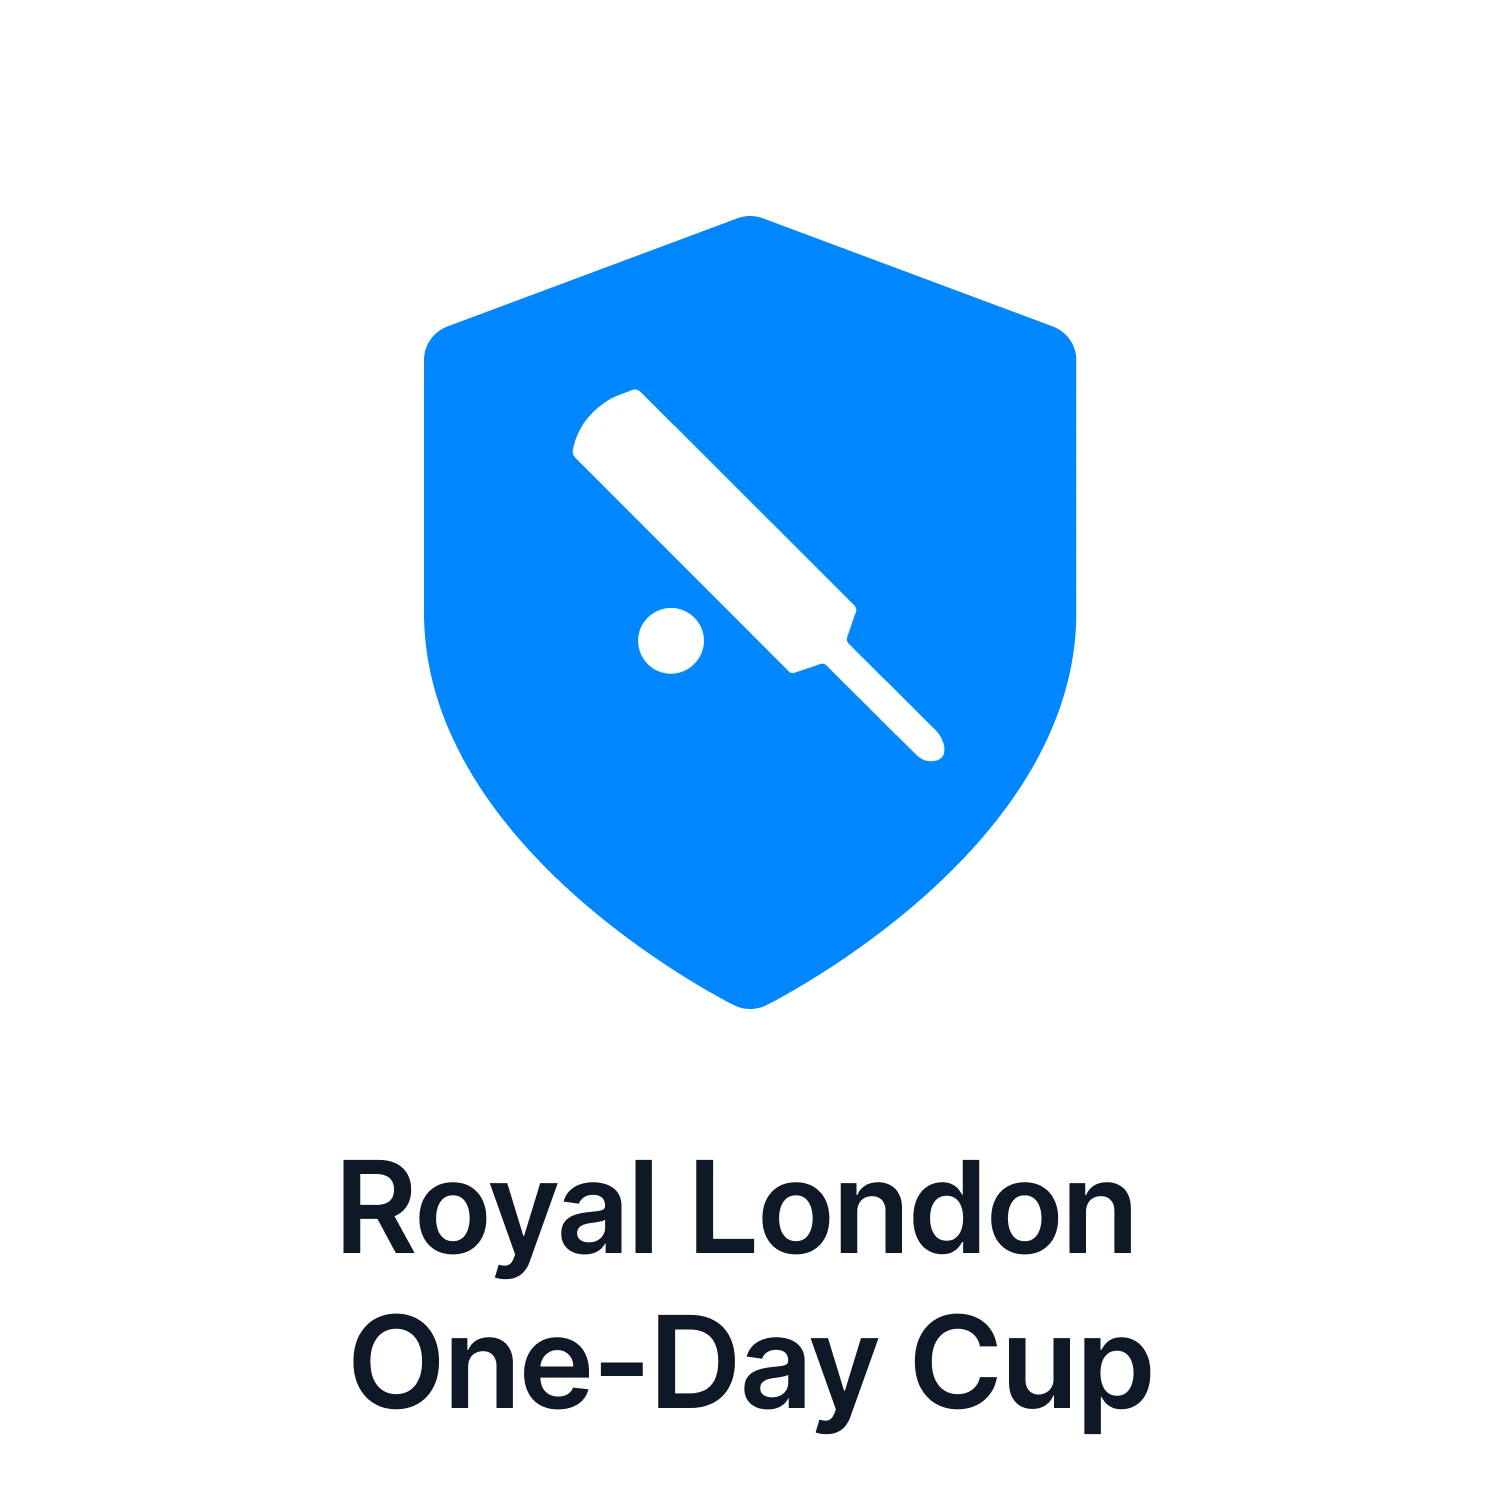 Read the experts' predictions on the Royal London One-Day Cup matches.